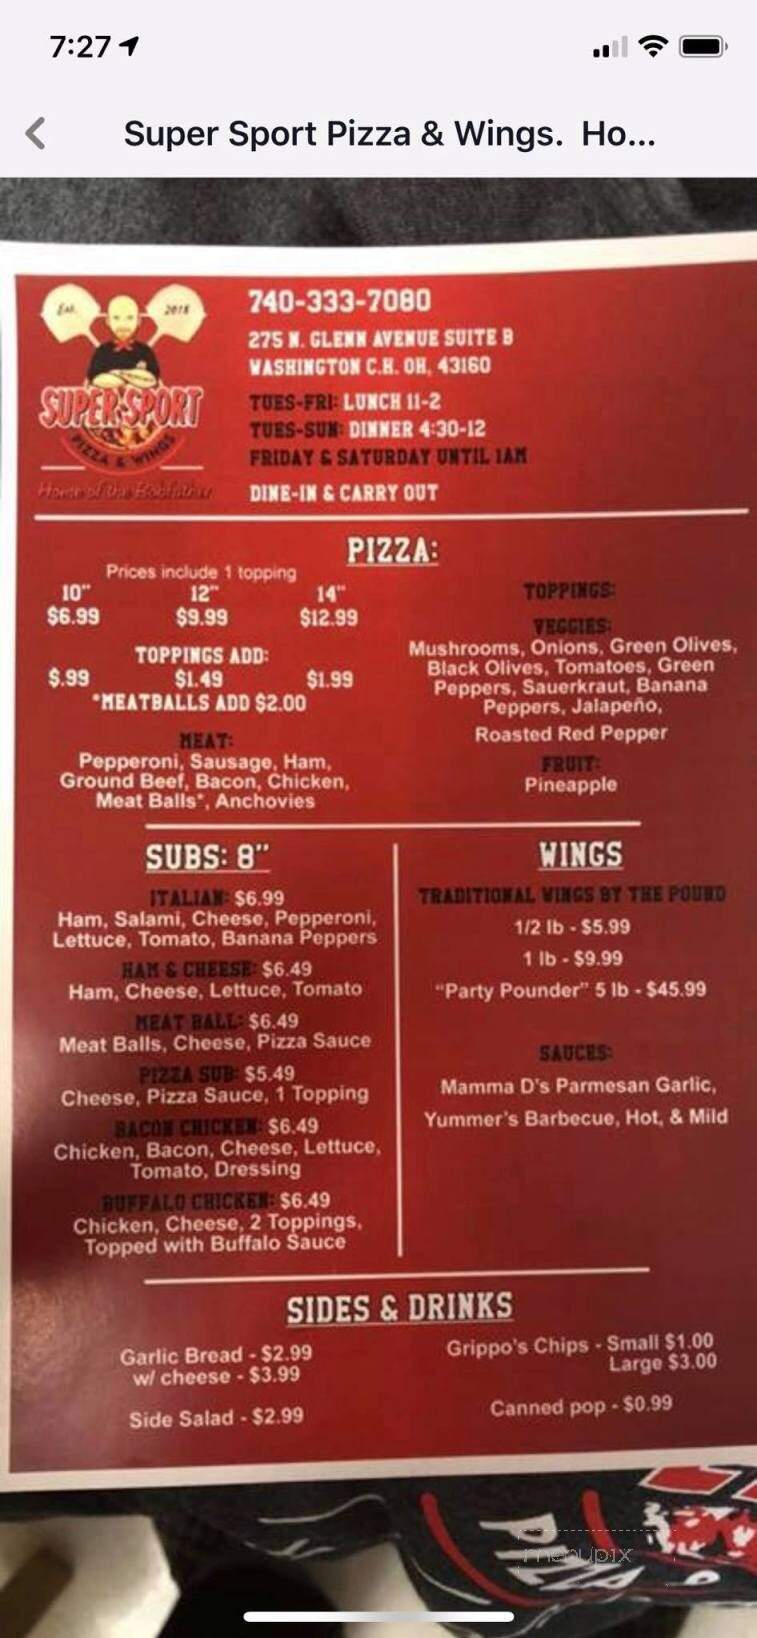 Super Sport Pizza And Wings - Washington Court House, OH